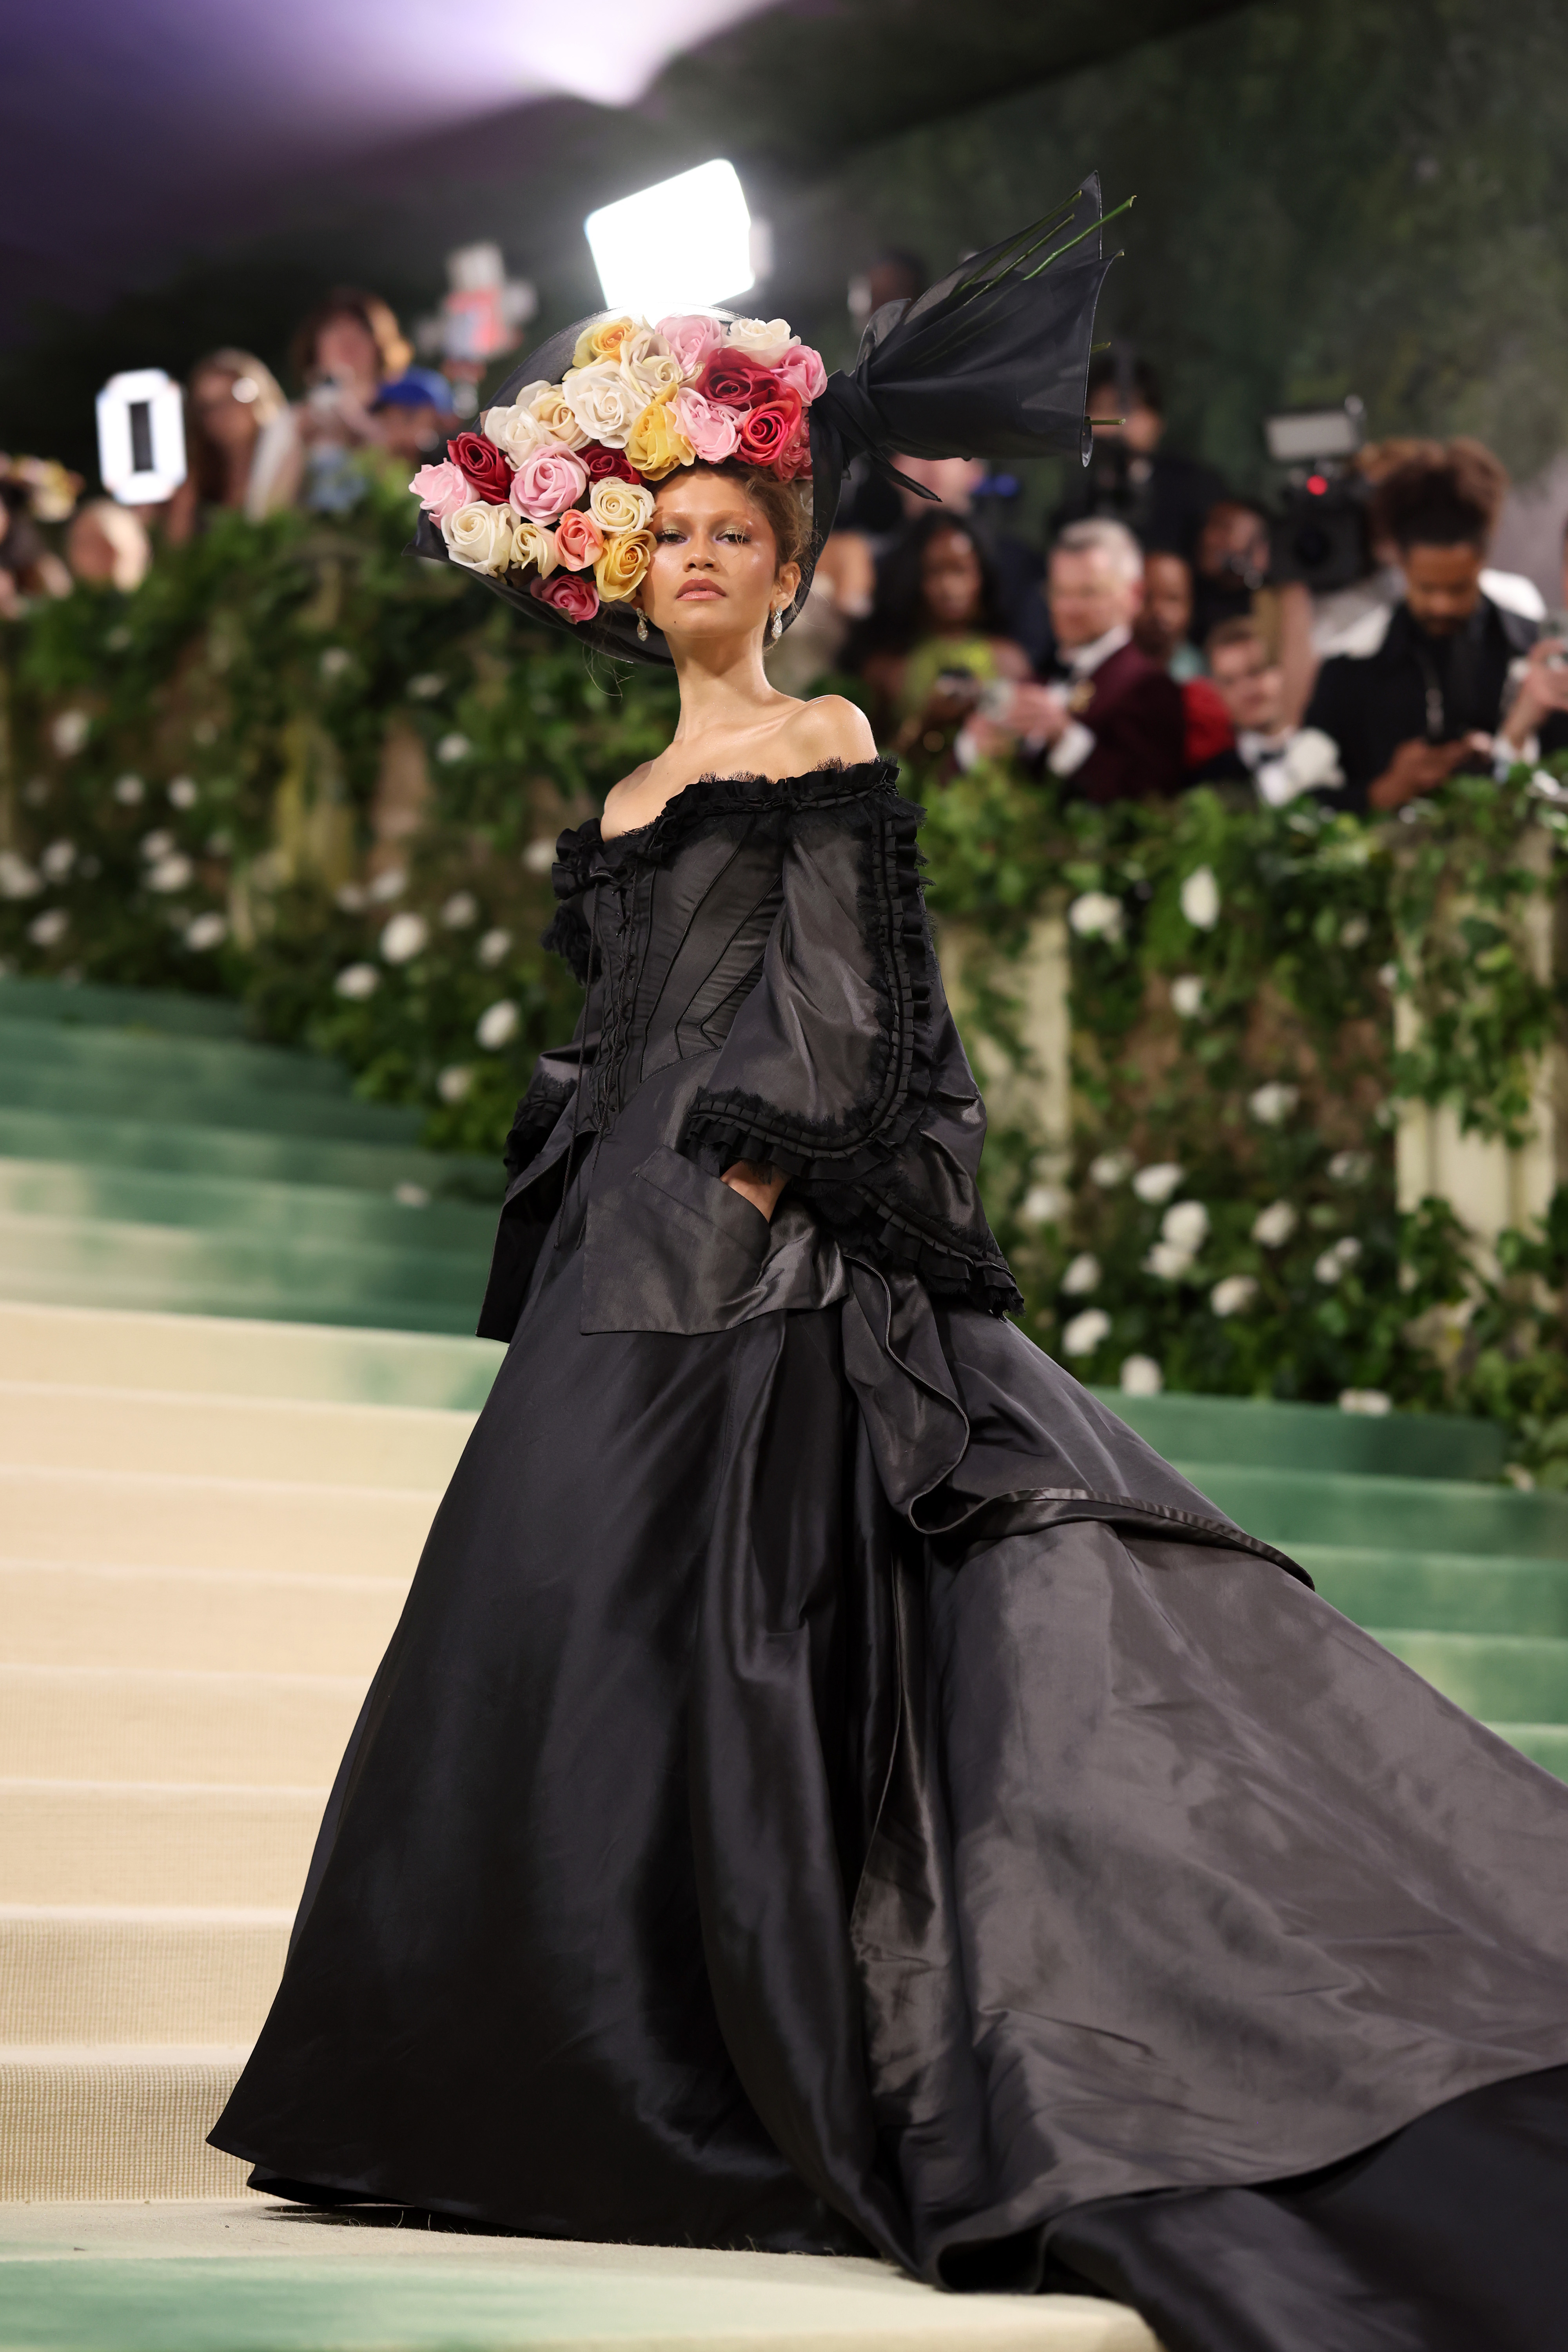 Zendaya in elaborate black gown with large floral headpiece on a staircase at an event